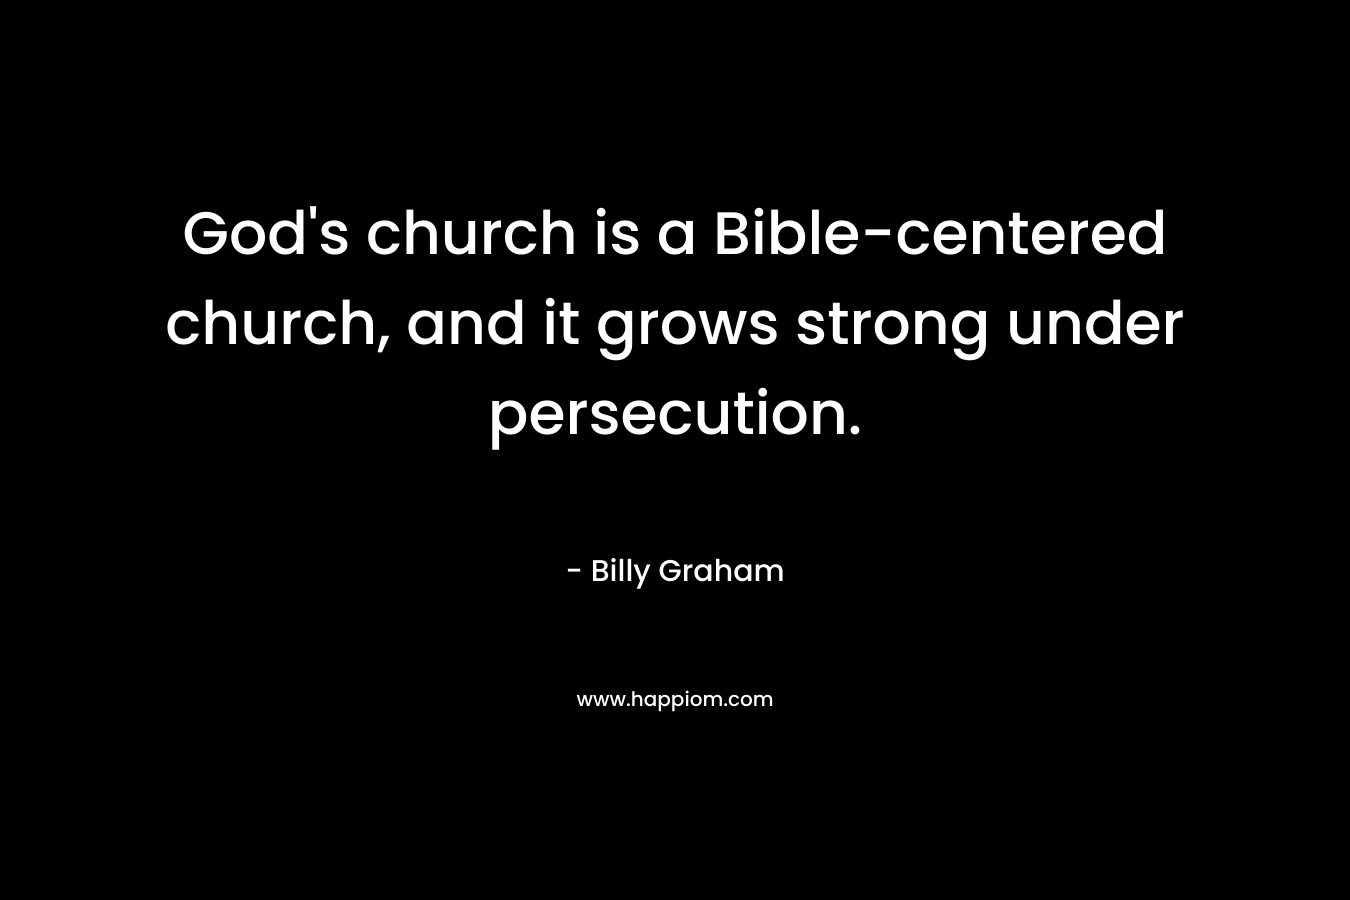 God's church is a Bible-centered church, and it grows strong under persecution.